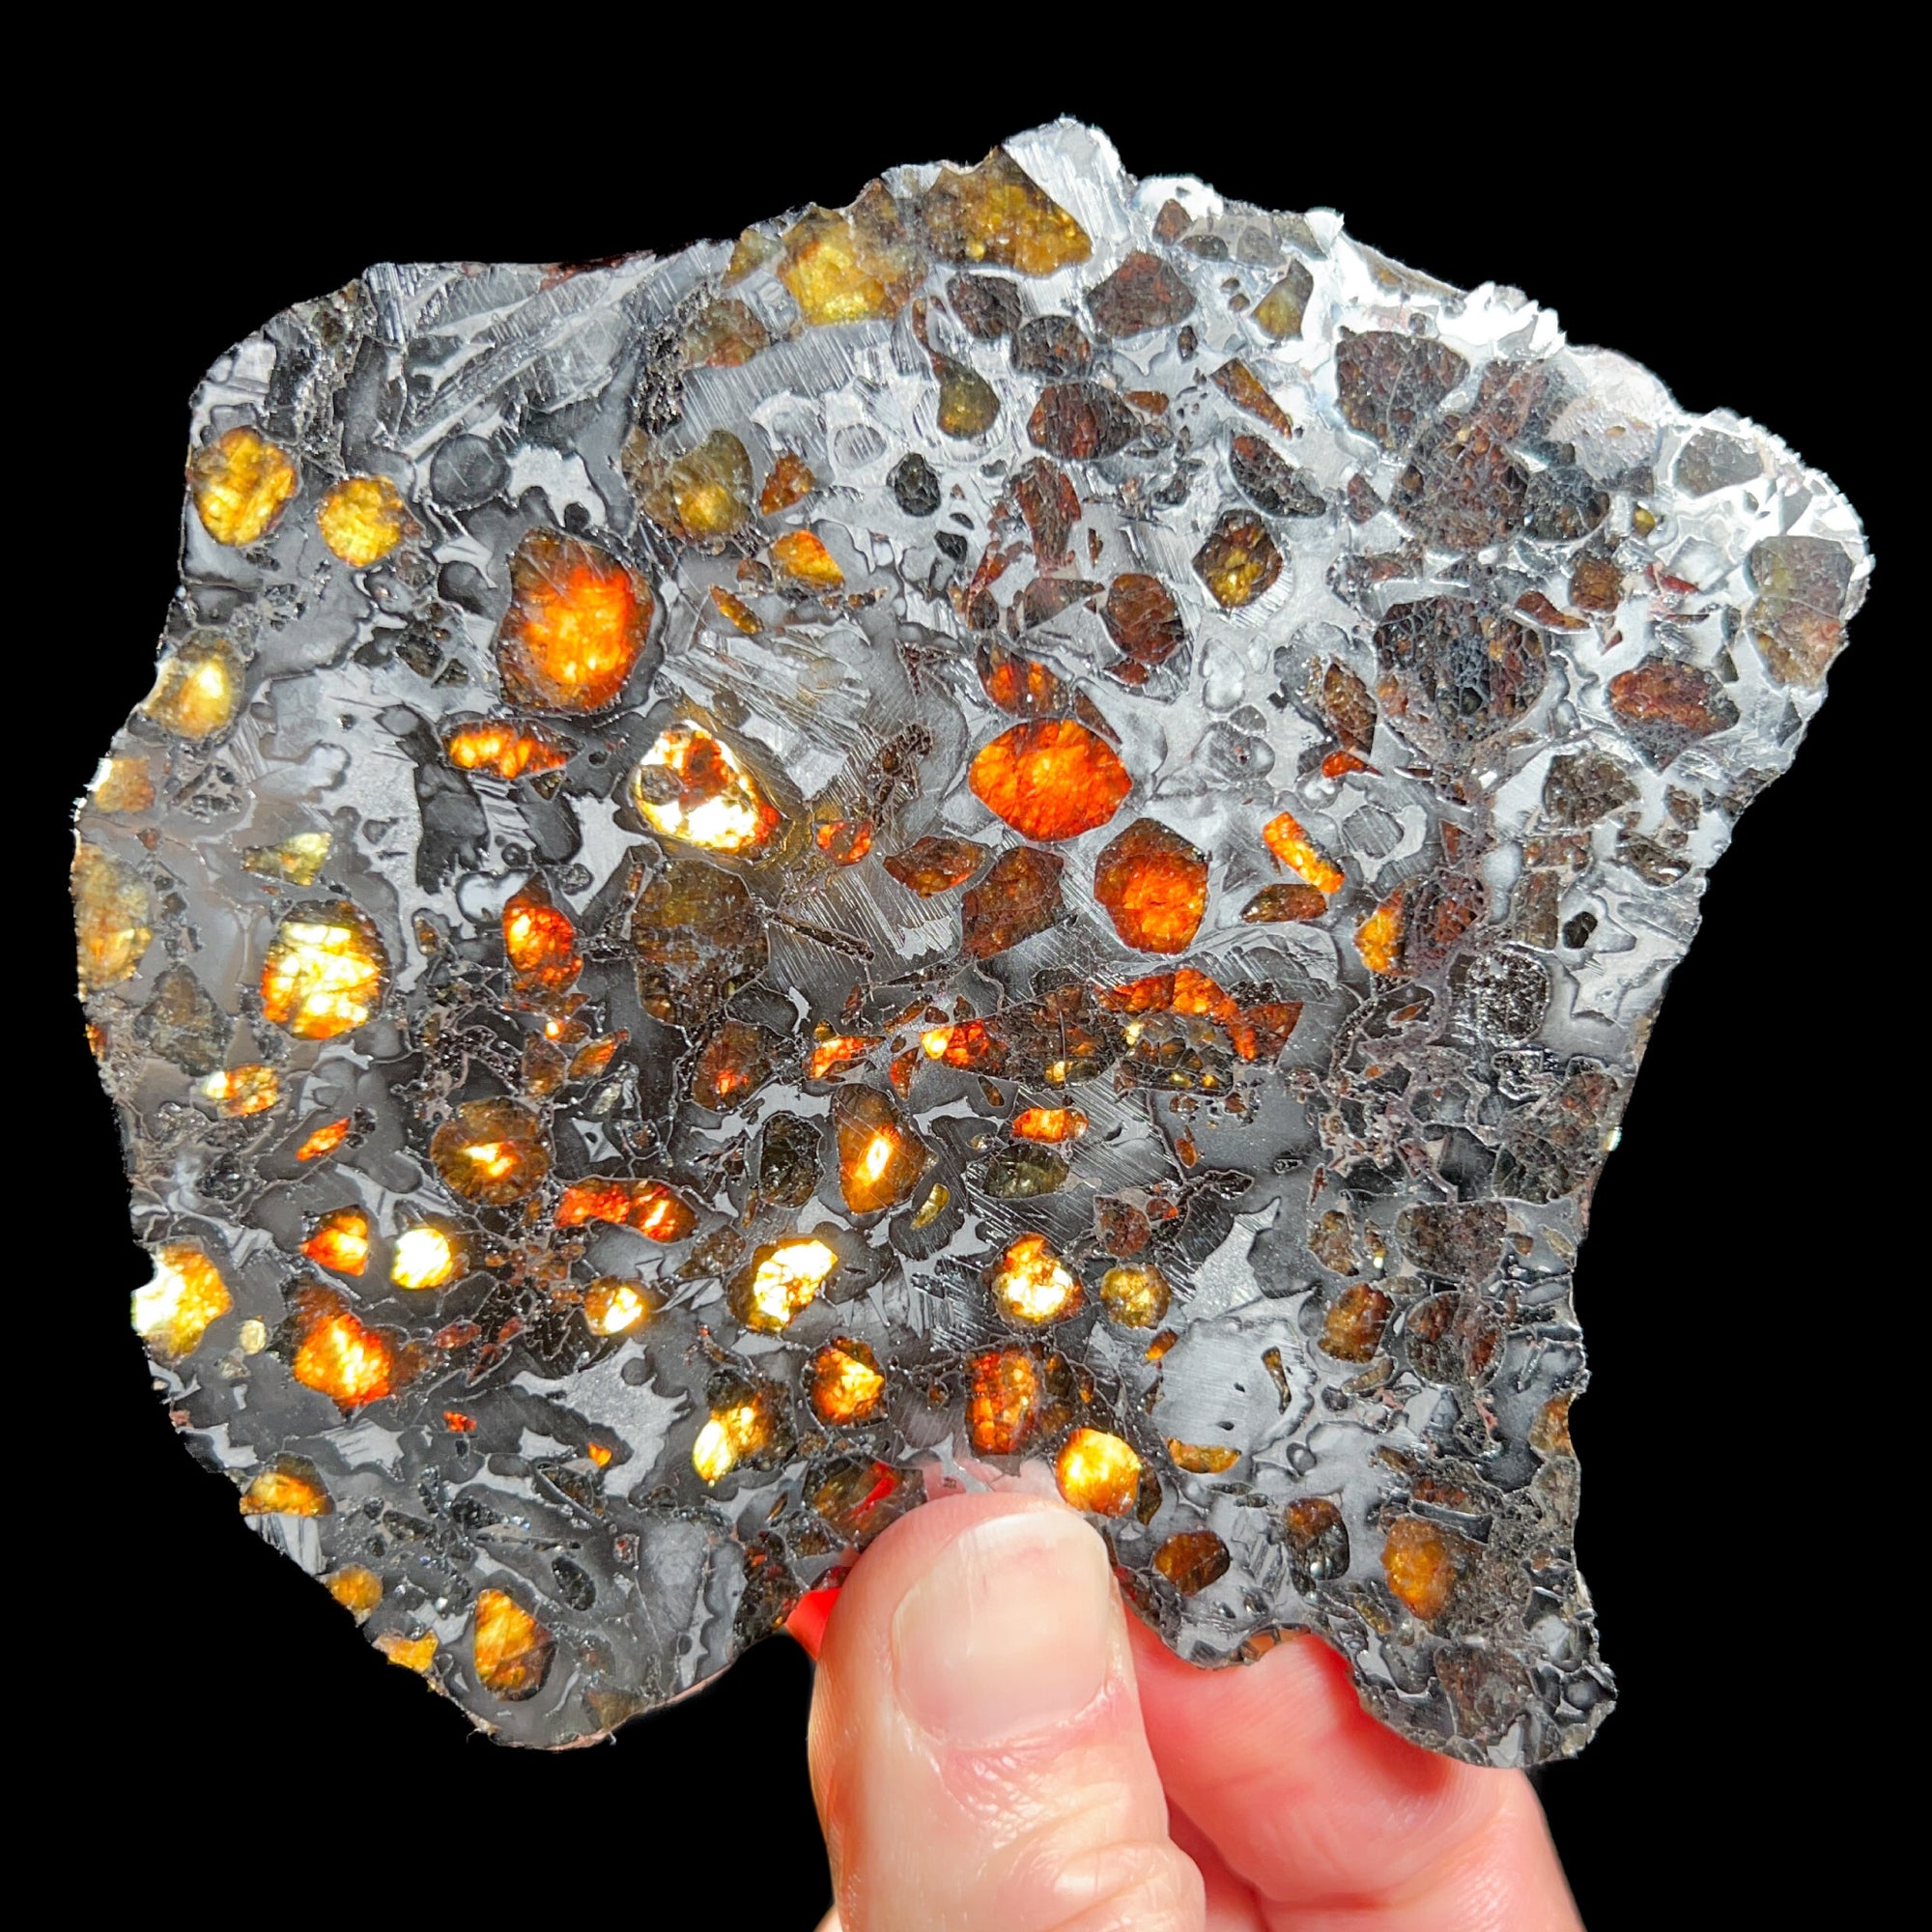 What is a Meteorite?